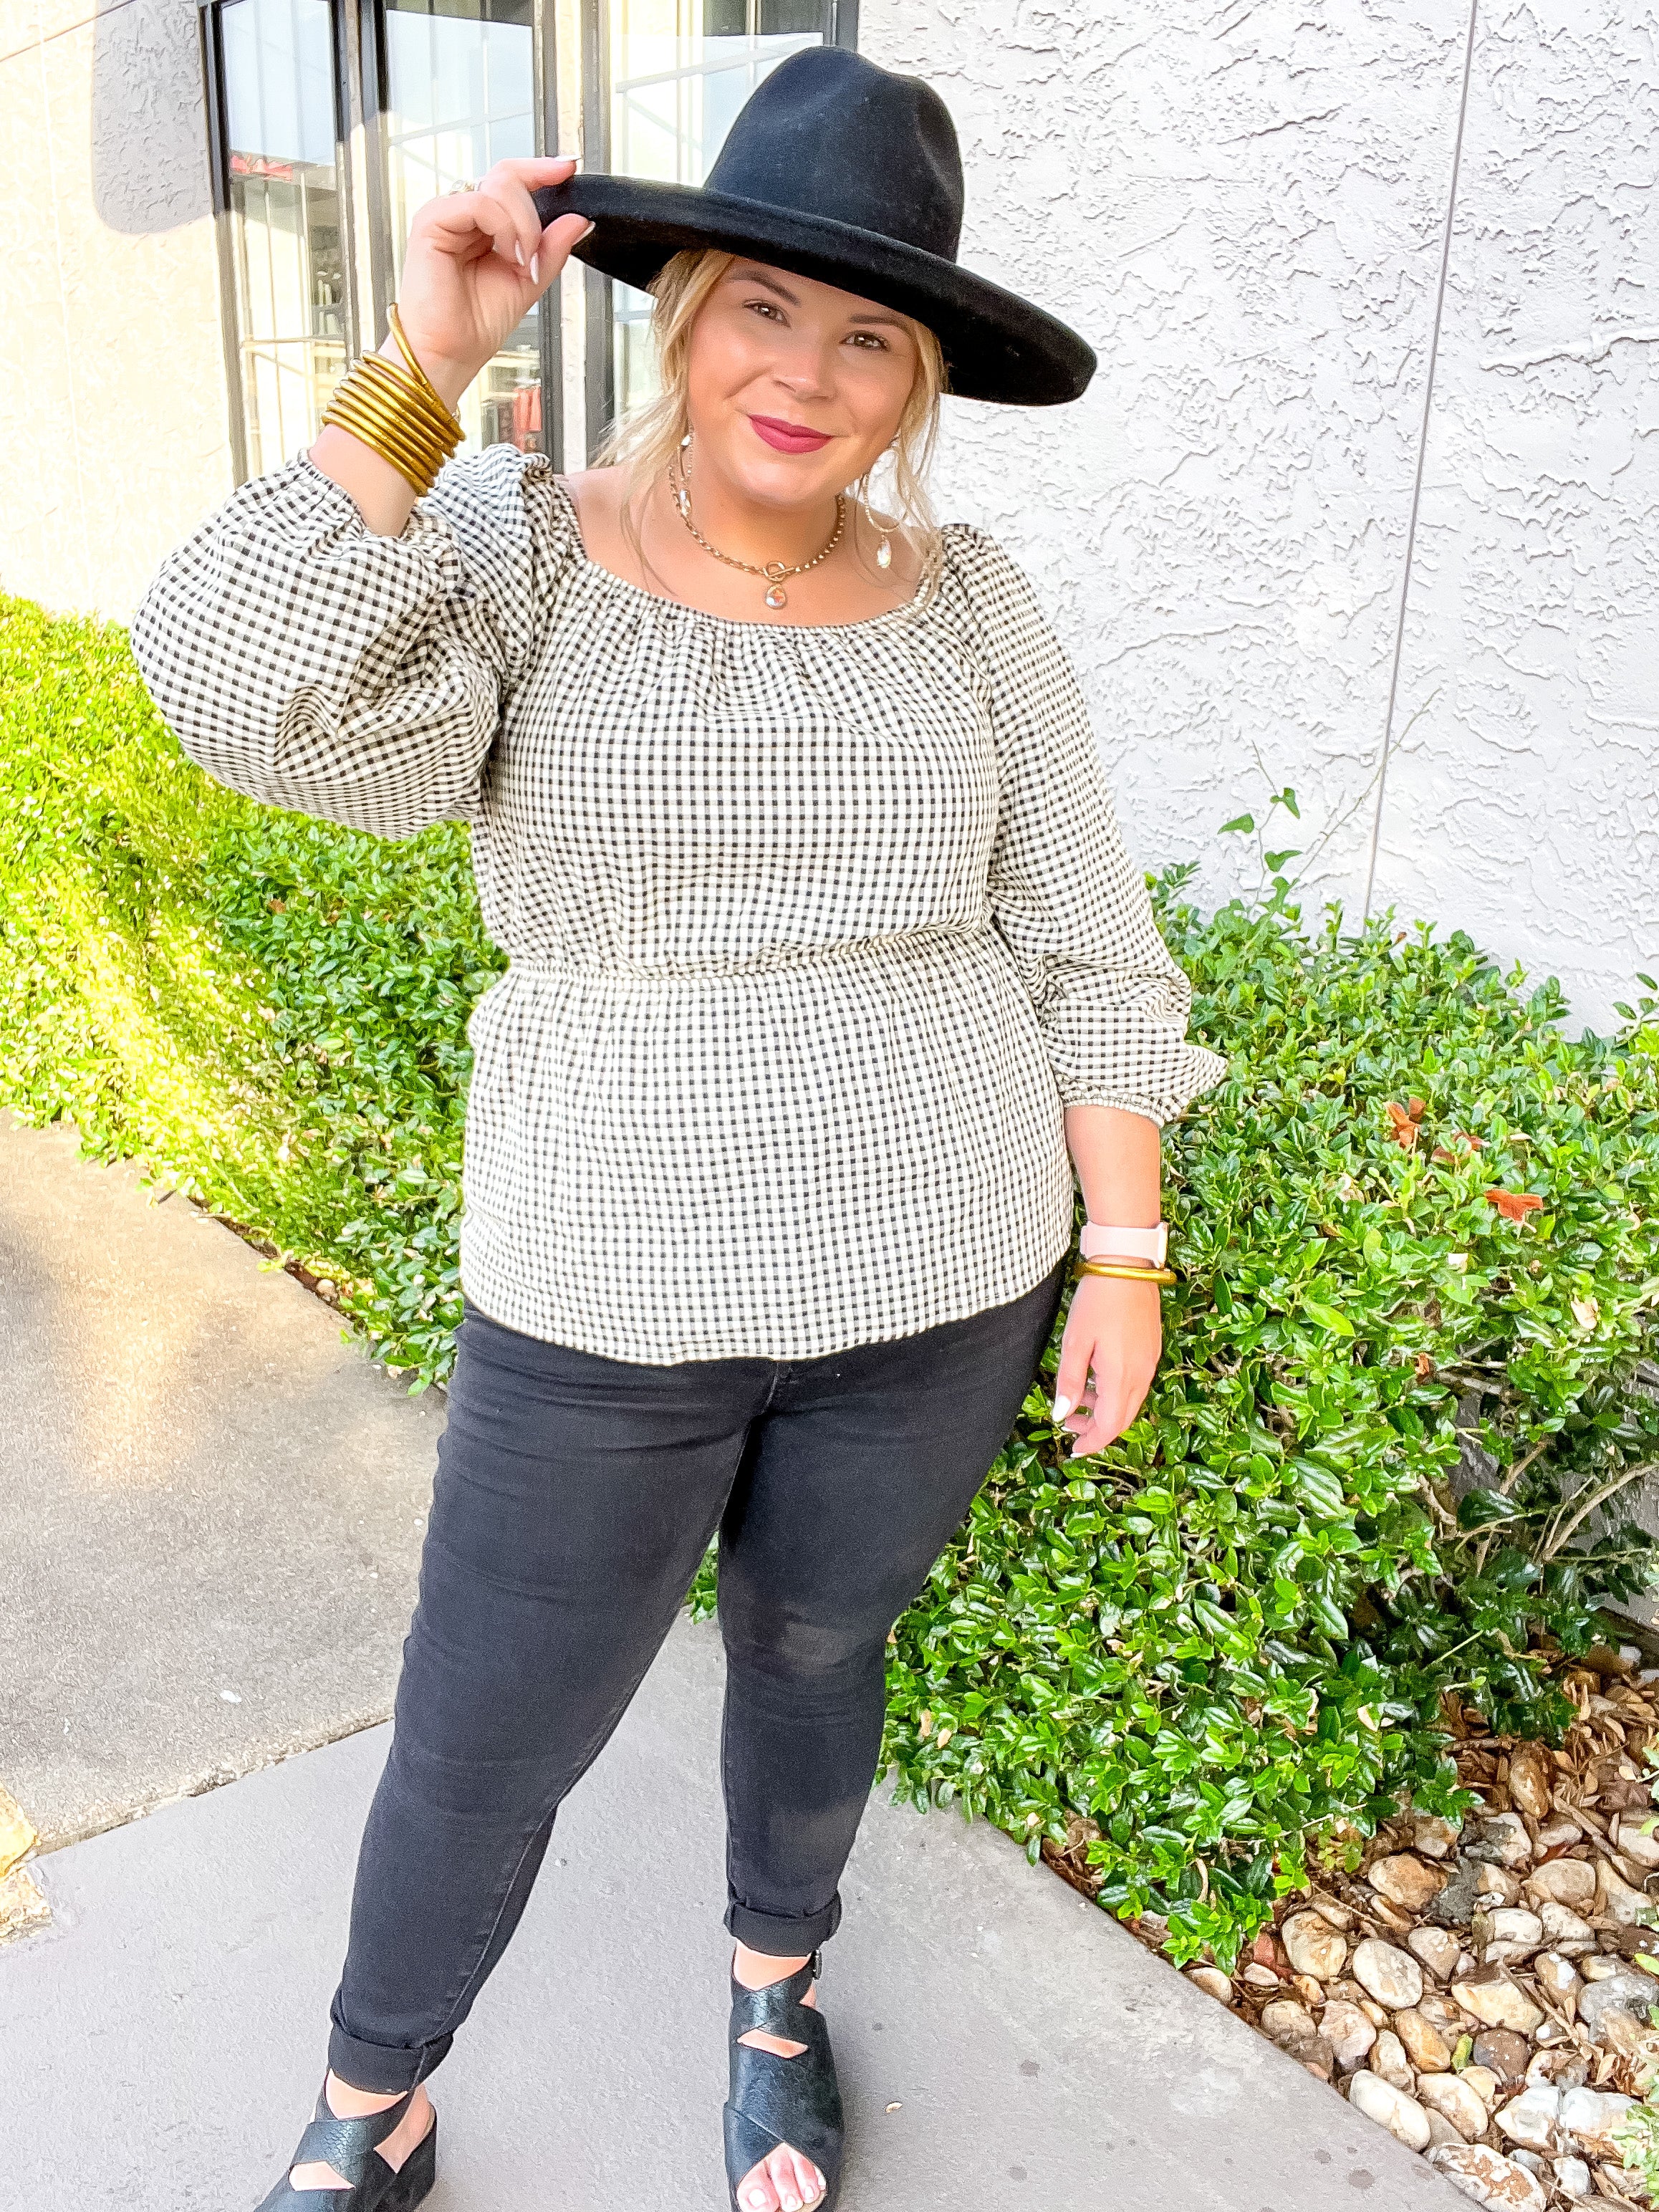 Autumn Sweetness Gingham Peplum Top with Long Sleeves in Black and Ivory - Giddy Up Glamour Boutique